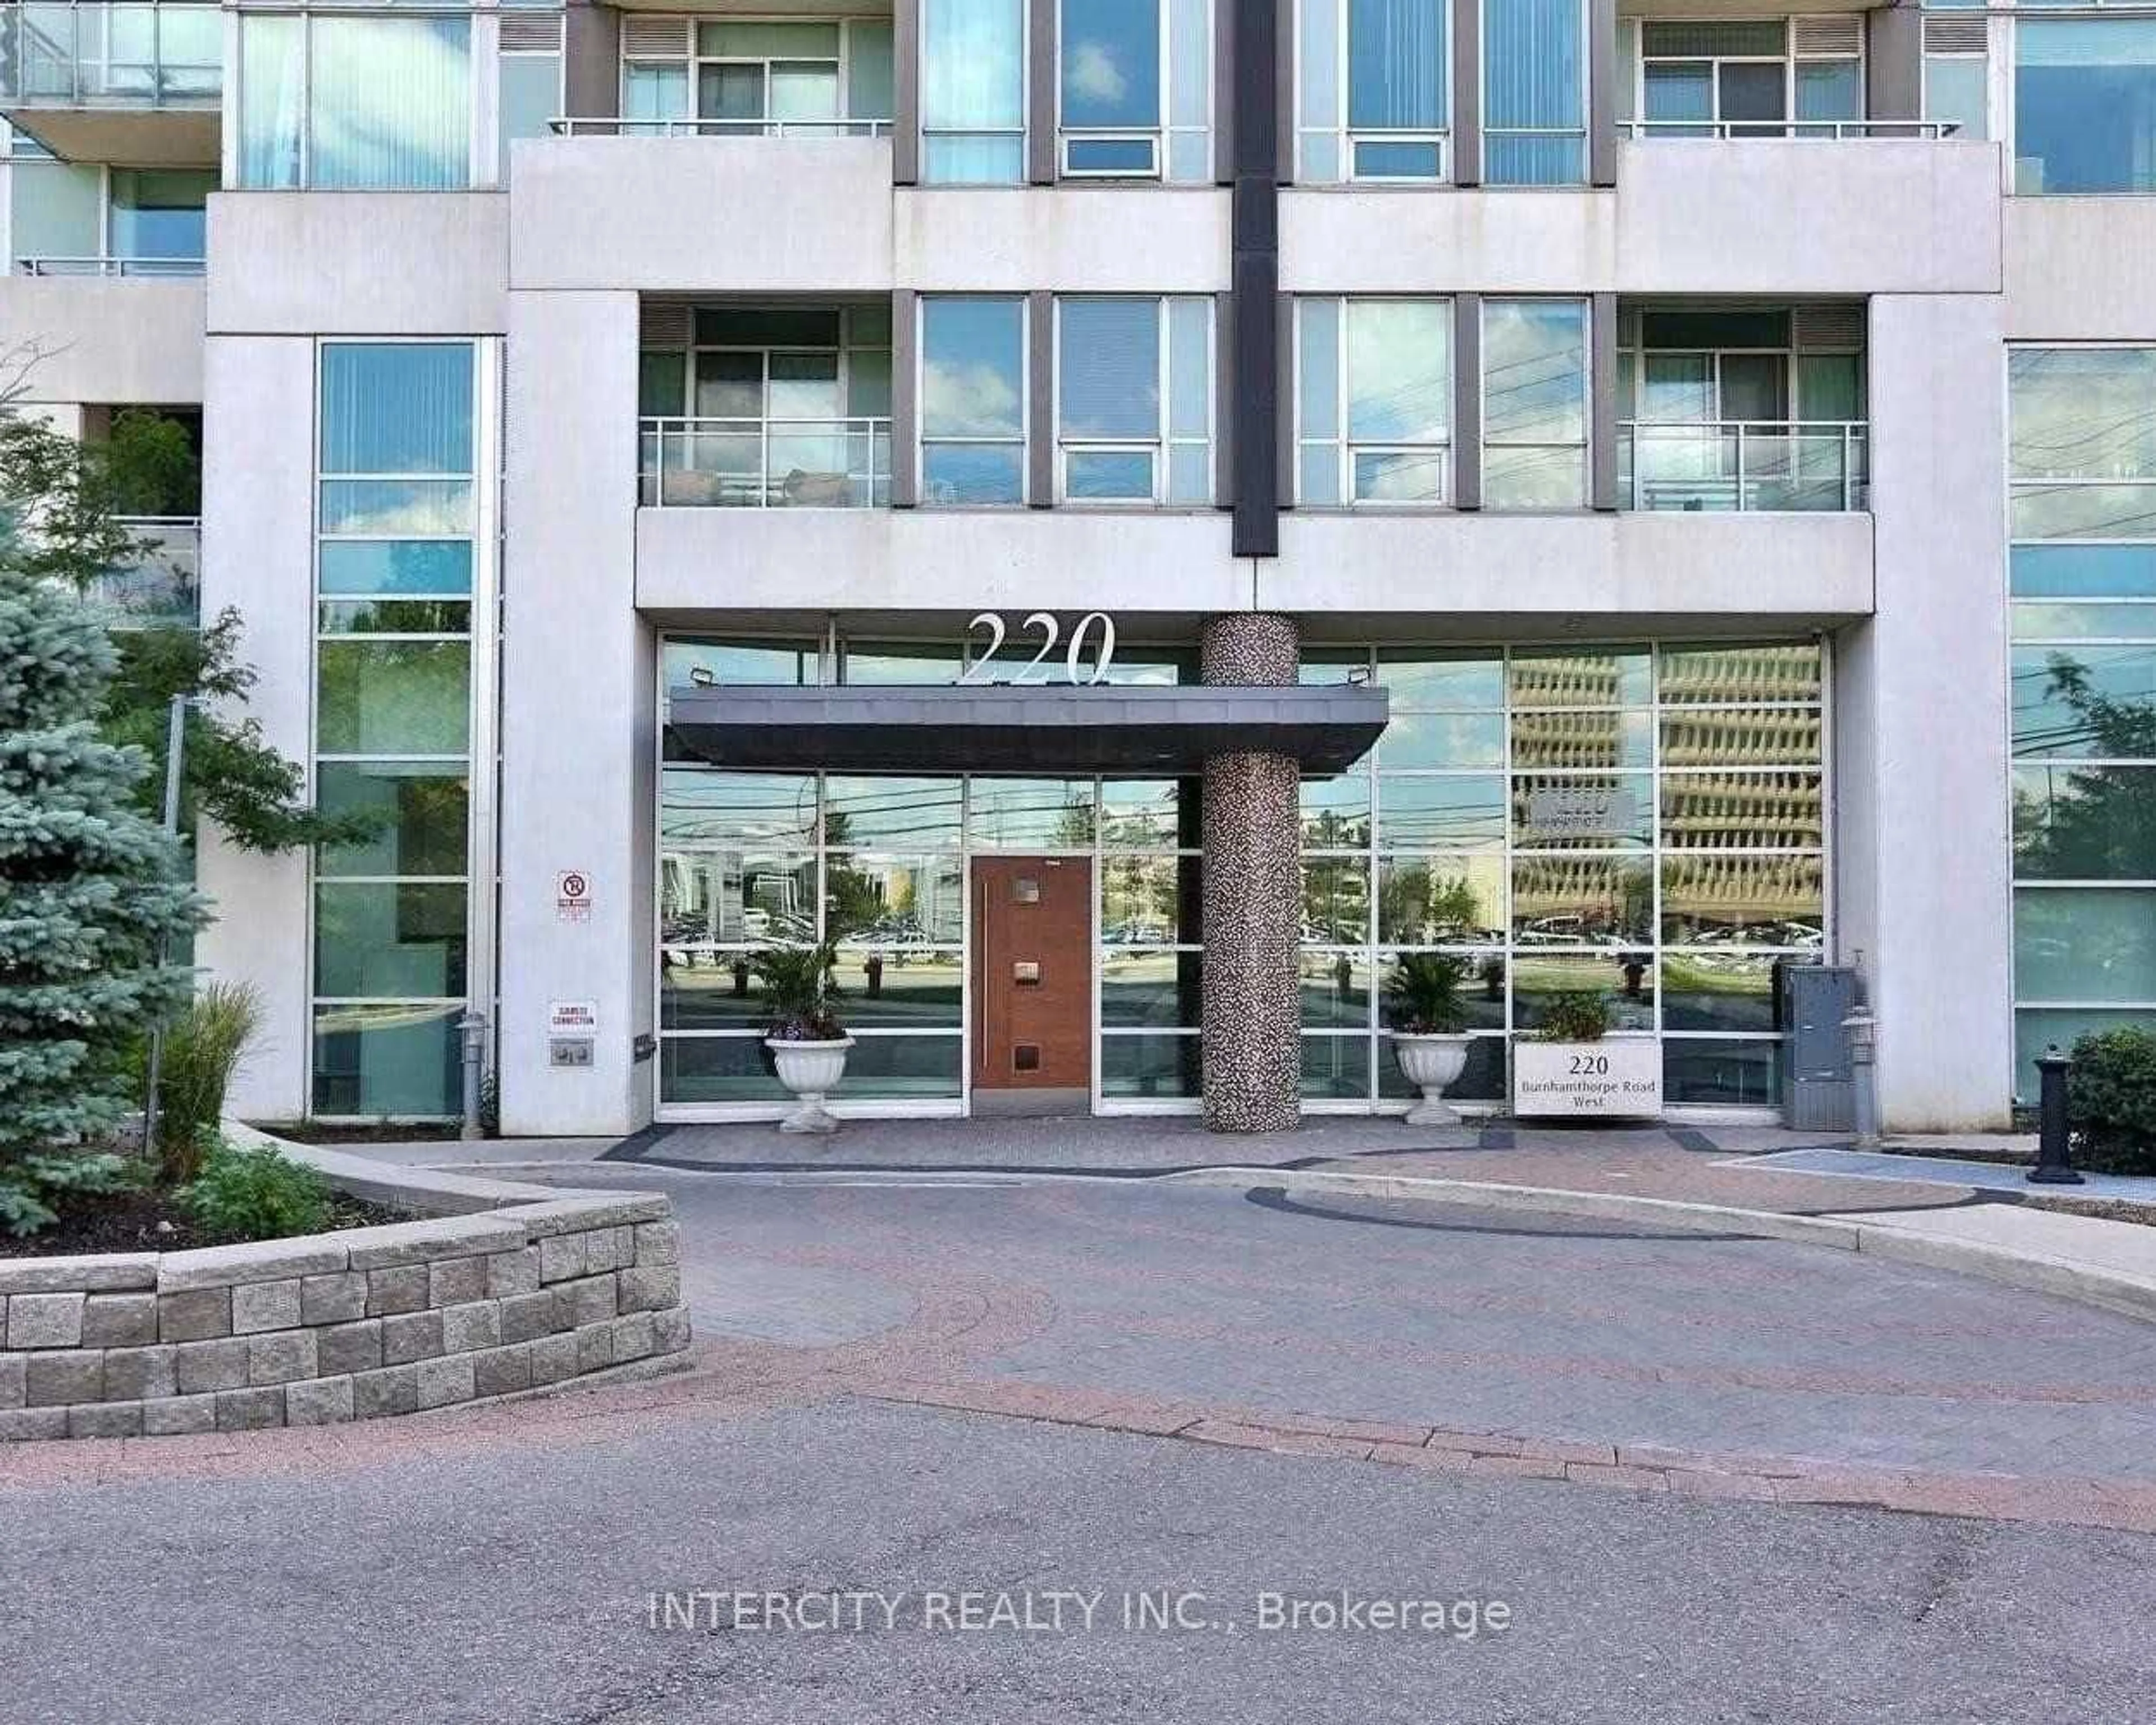 A pic from exterior of the house or condo for 220 Burnhamthorpe Rd #924, Mississauga Ontario L5B 4N4